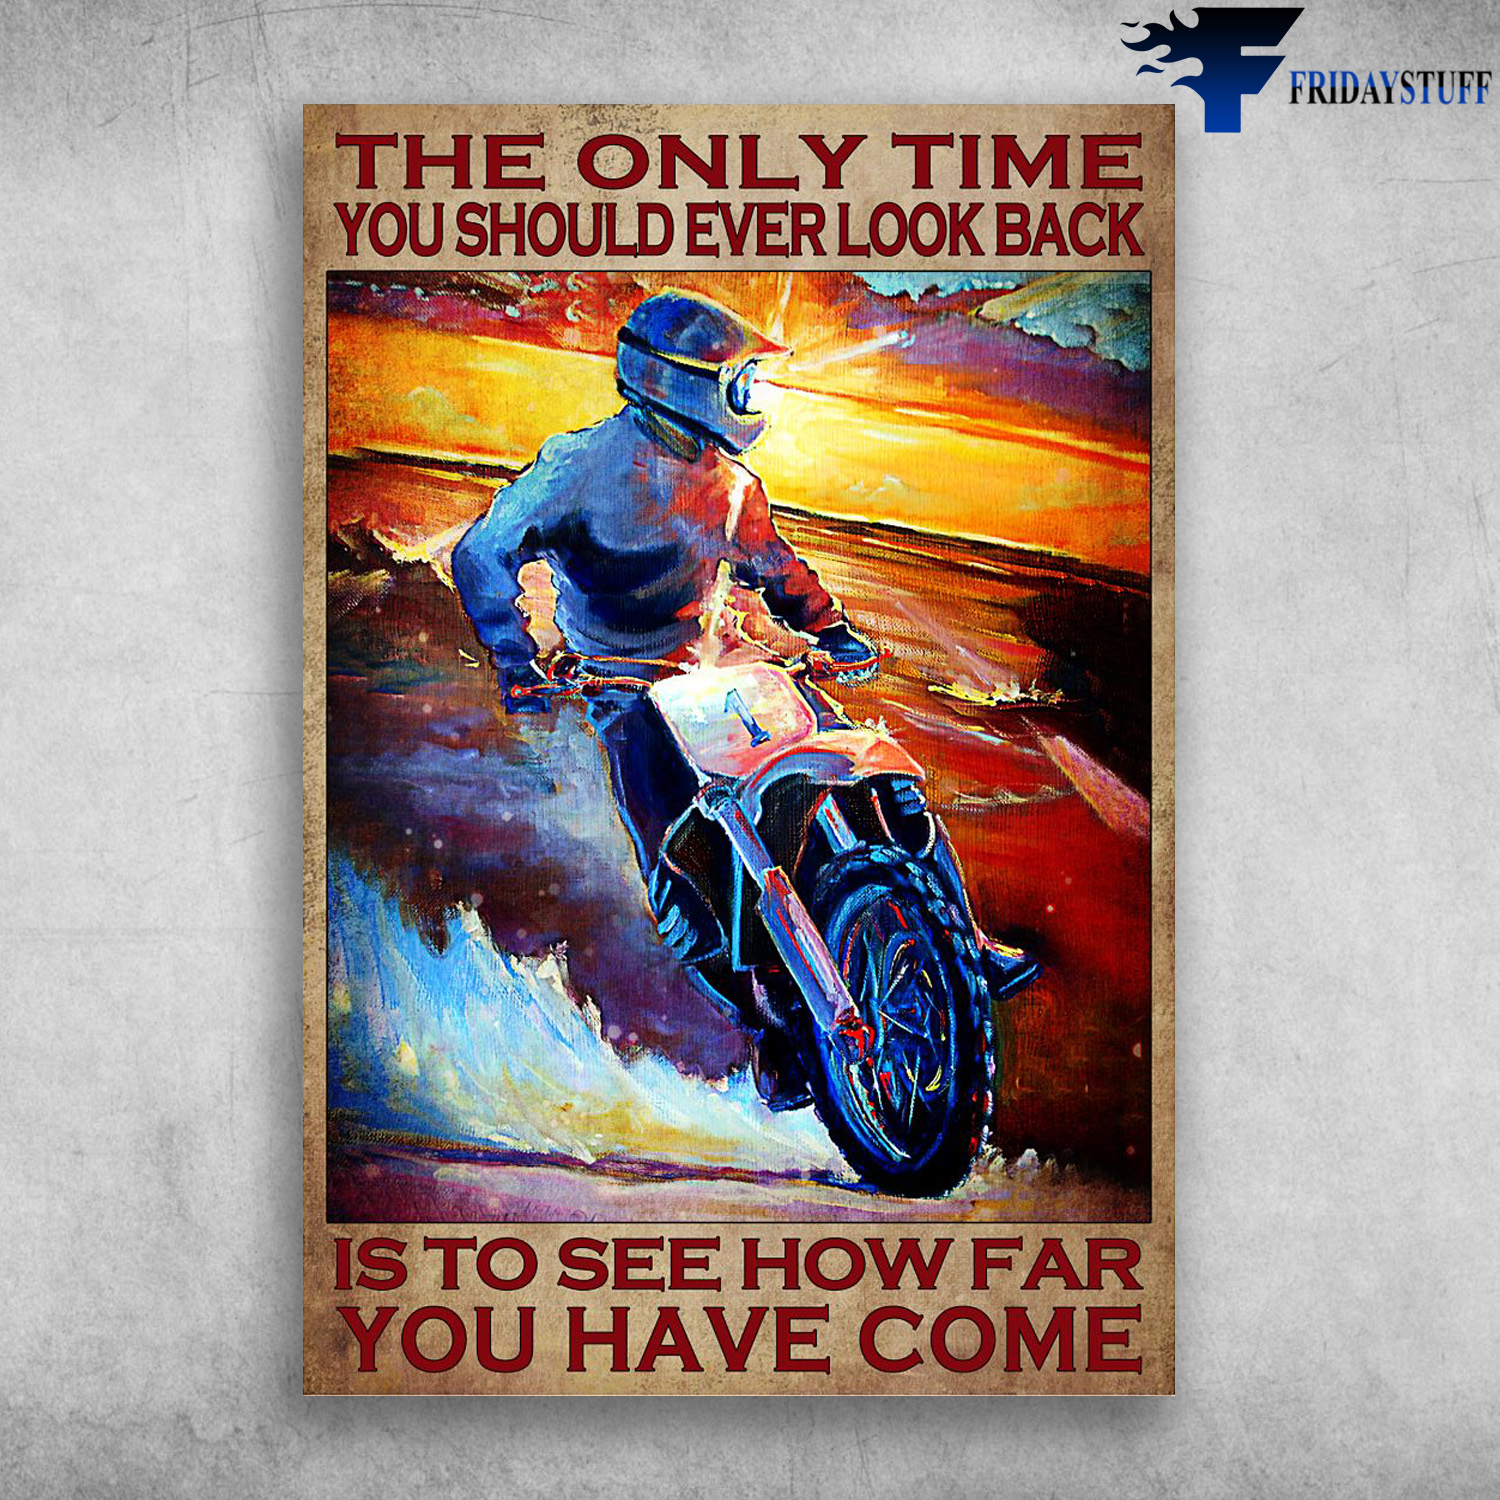 Motocross Man - The Only Time You Should Ever Look Back, Is To See How Far You Have Come